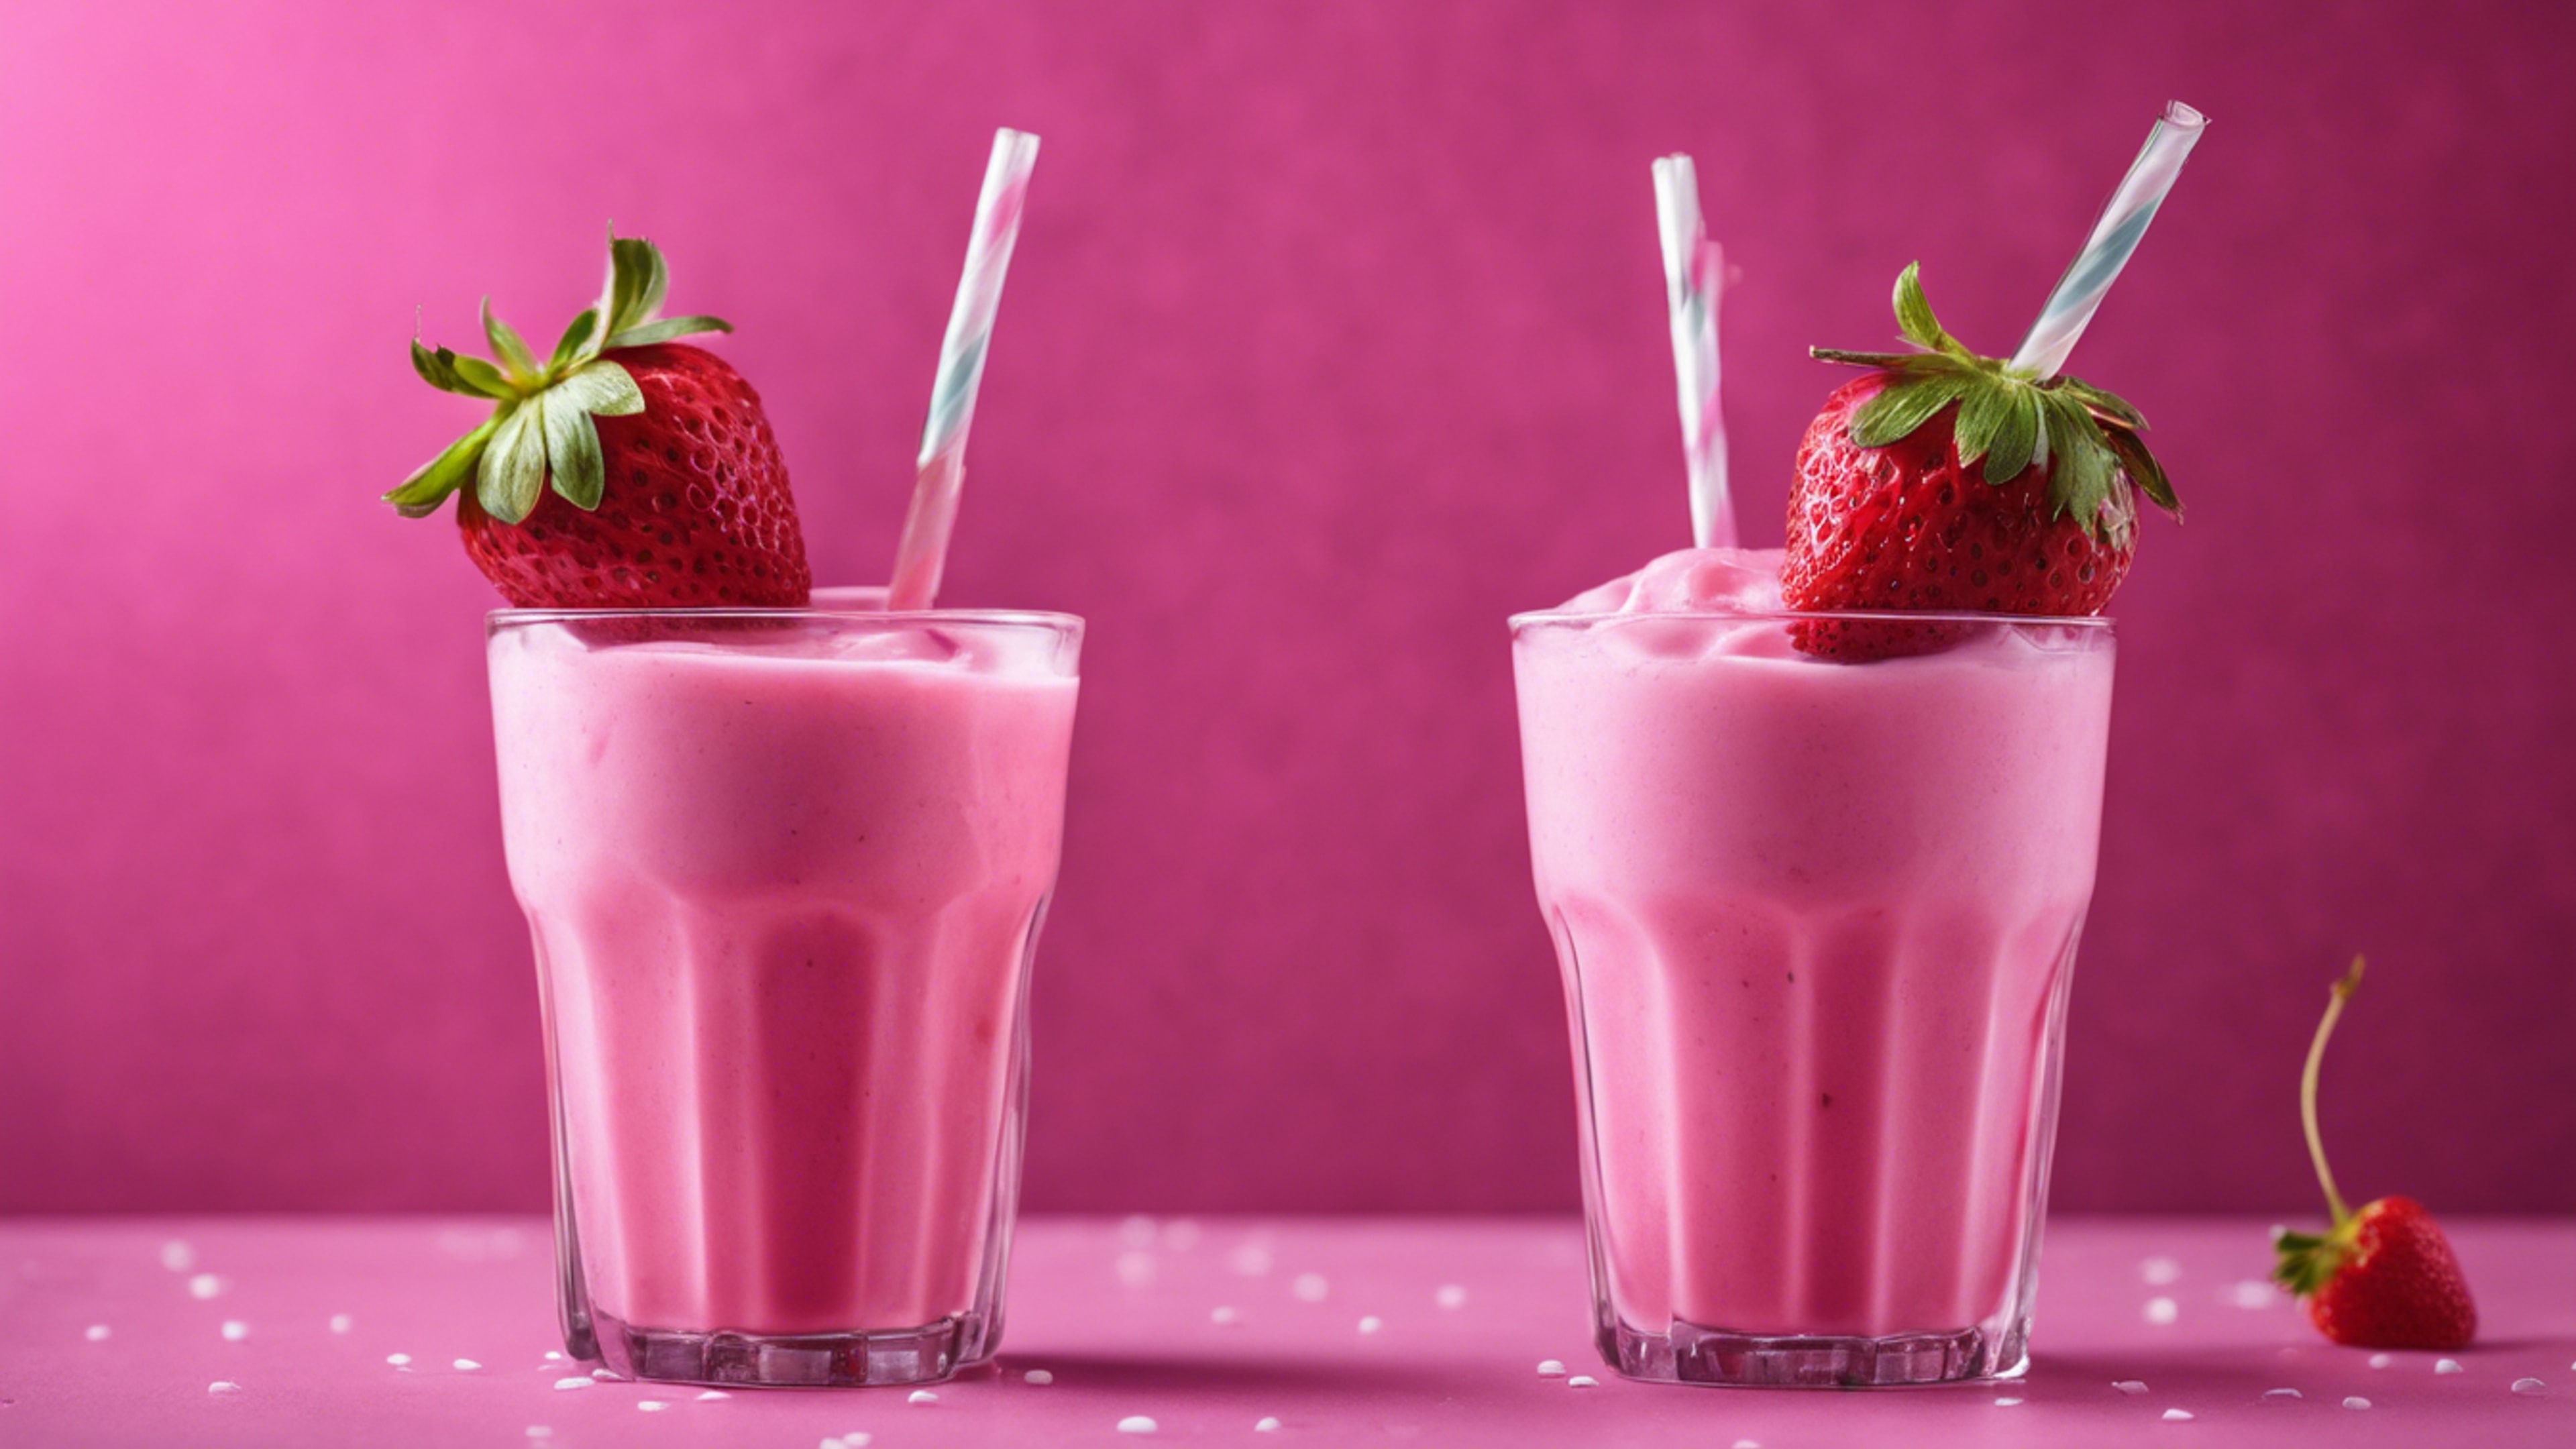 Two glasses filled with bright pink strawberry milkshake garnished with straws and cherries. Тапет[367e513037cf4f879d8a]